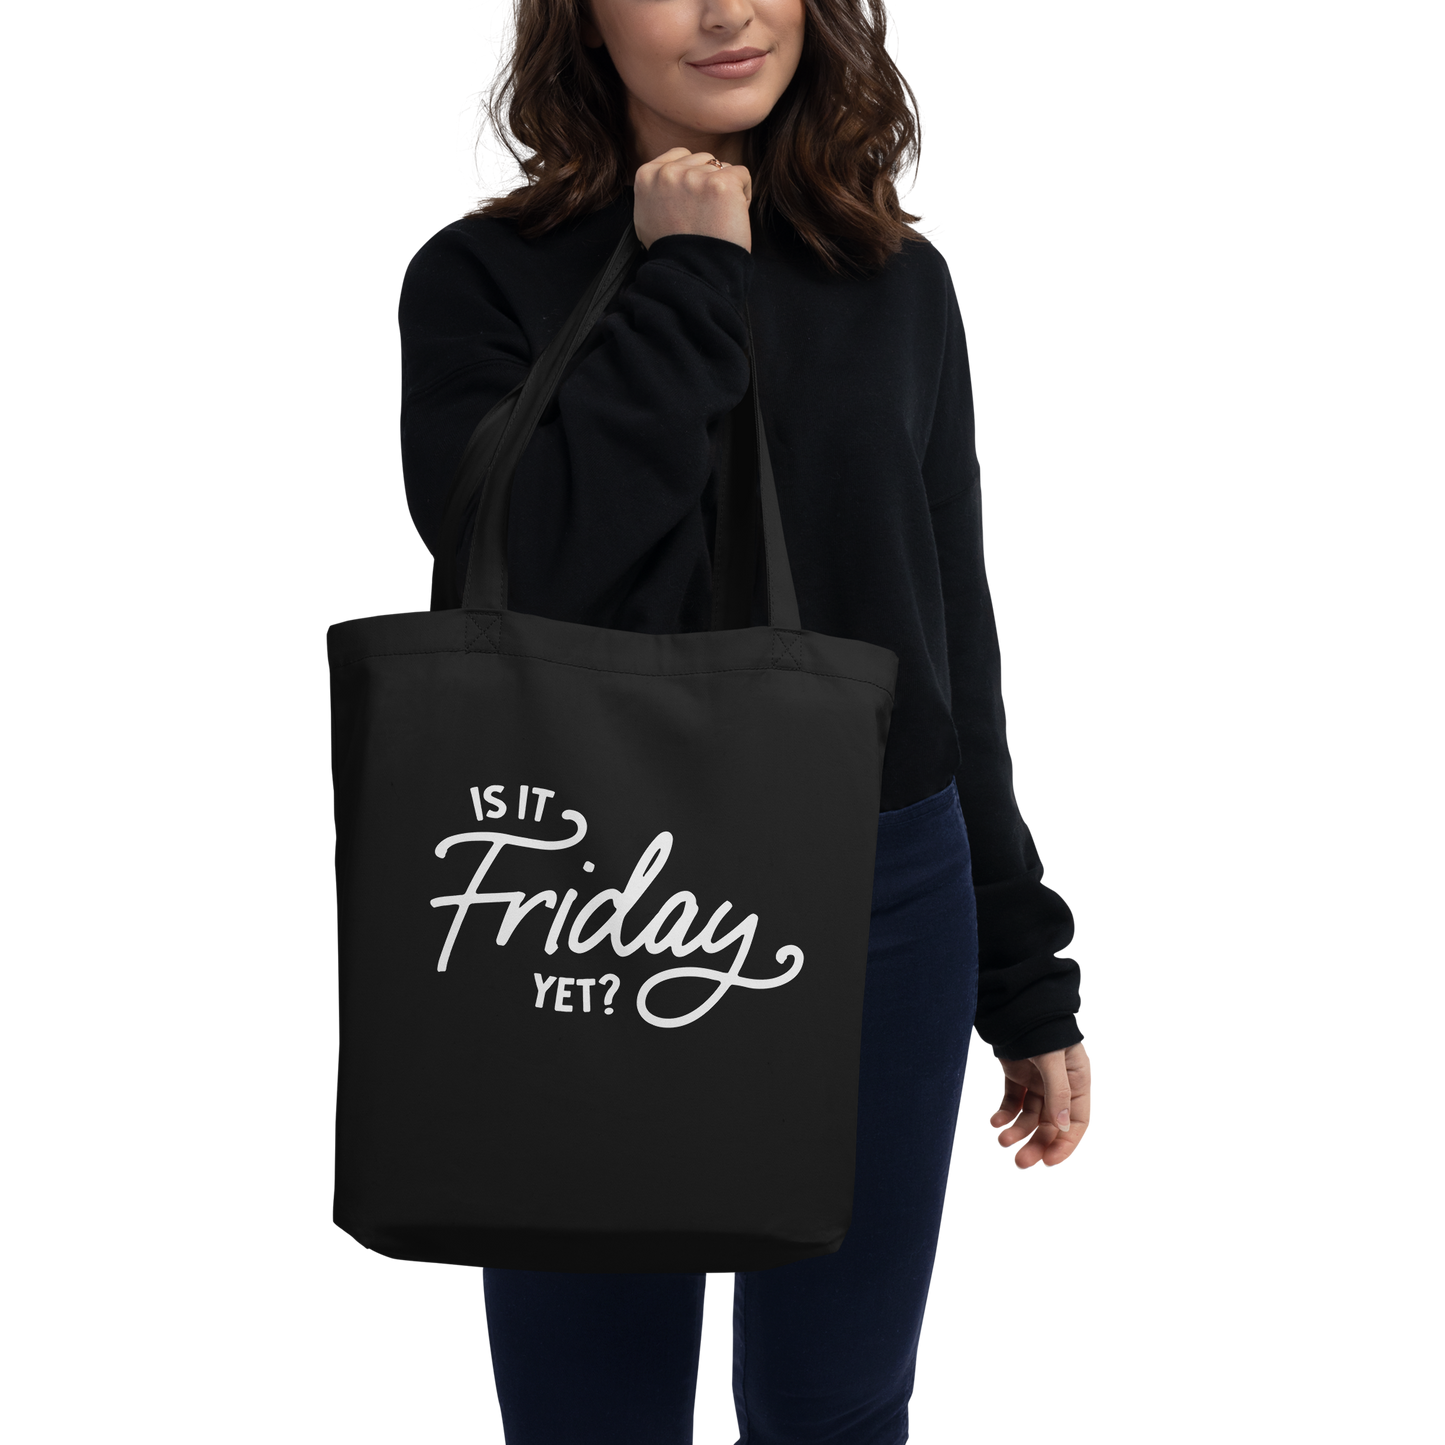 Is It Friday Yet? Tote Bag